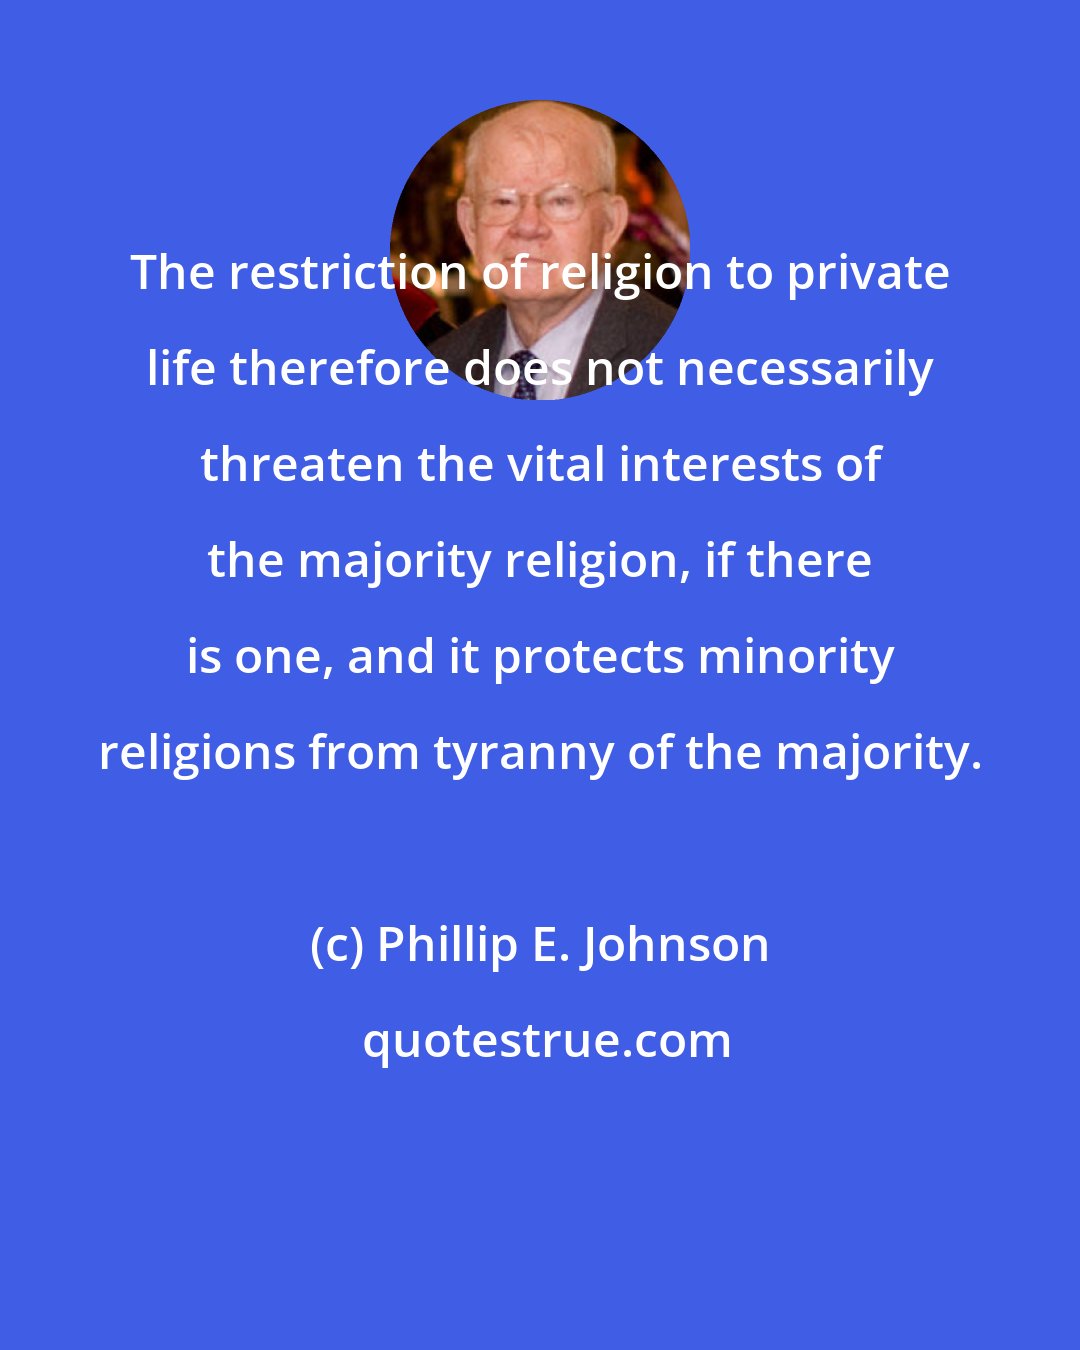 Phillip E. Johnson: The restriction of religion to private life therefore does not necessarily threaten the vital interests of the majority religion, if there is one, and it protects minority religions from tyranny of the majority.